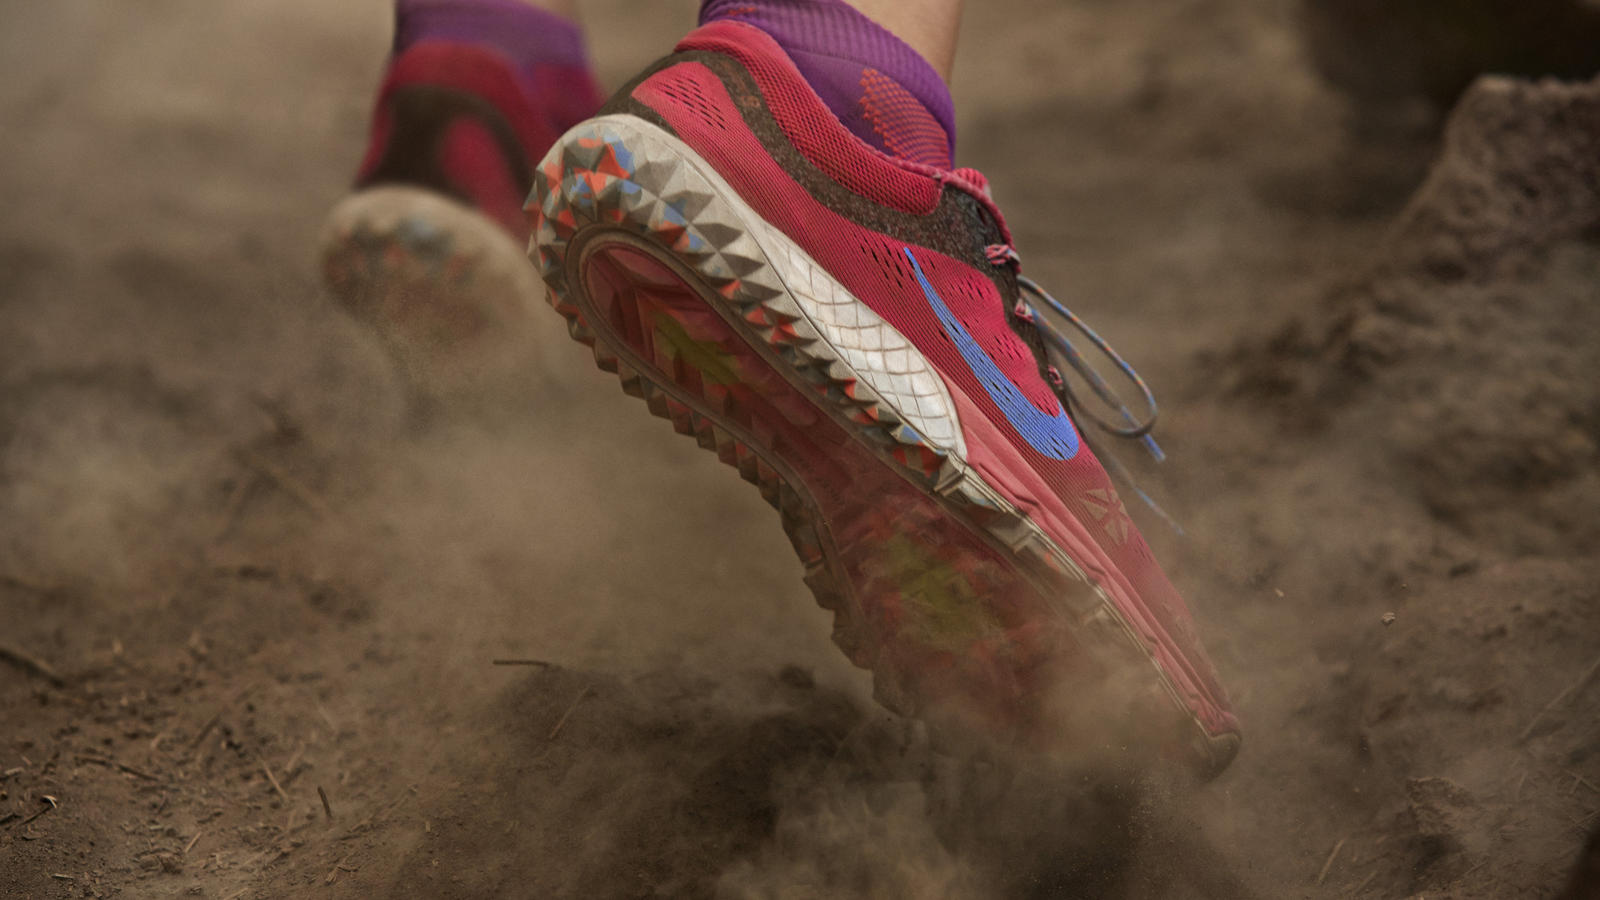 Nike Obstacle Course Shoes - HD Wallpaper 